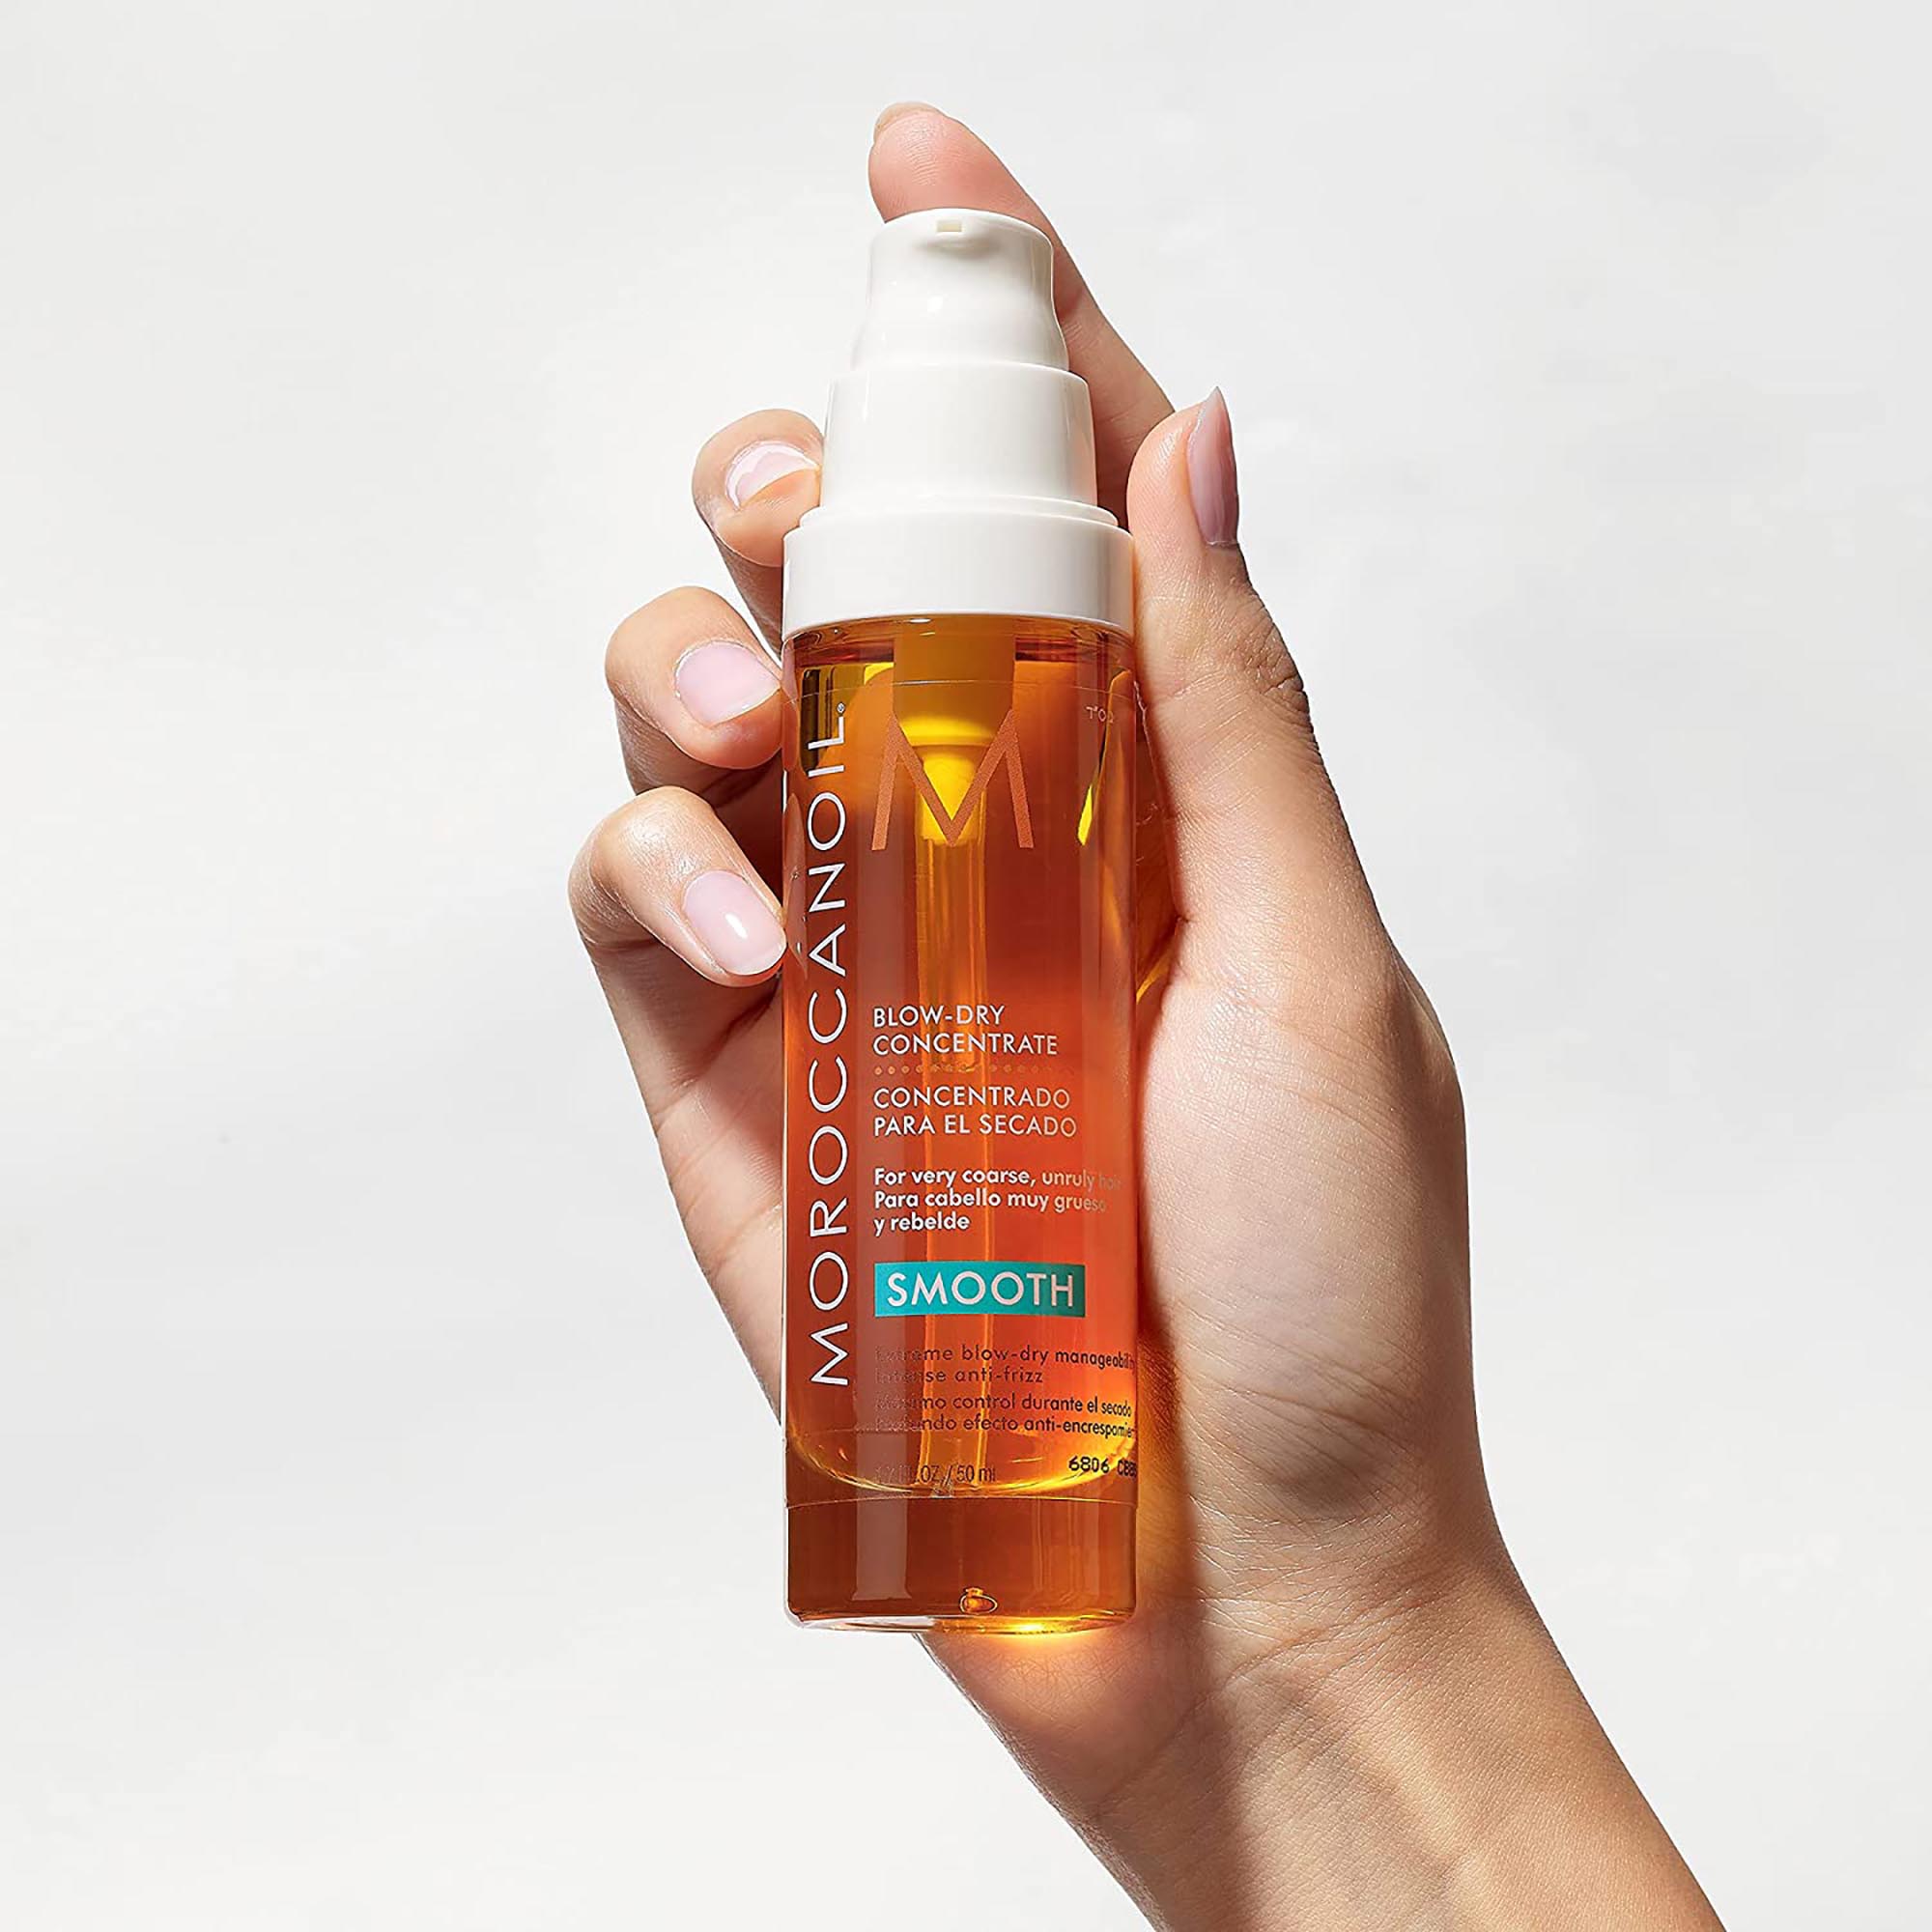 Moroccanoil Blow Dry Concentrate / 1.7OZ